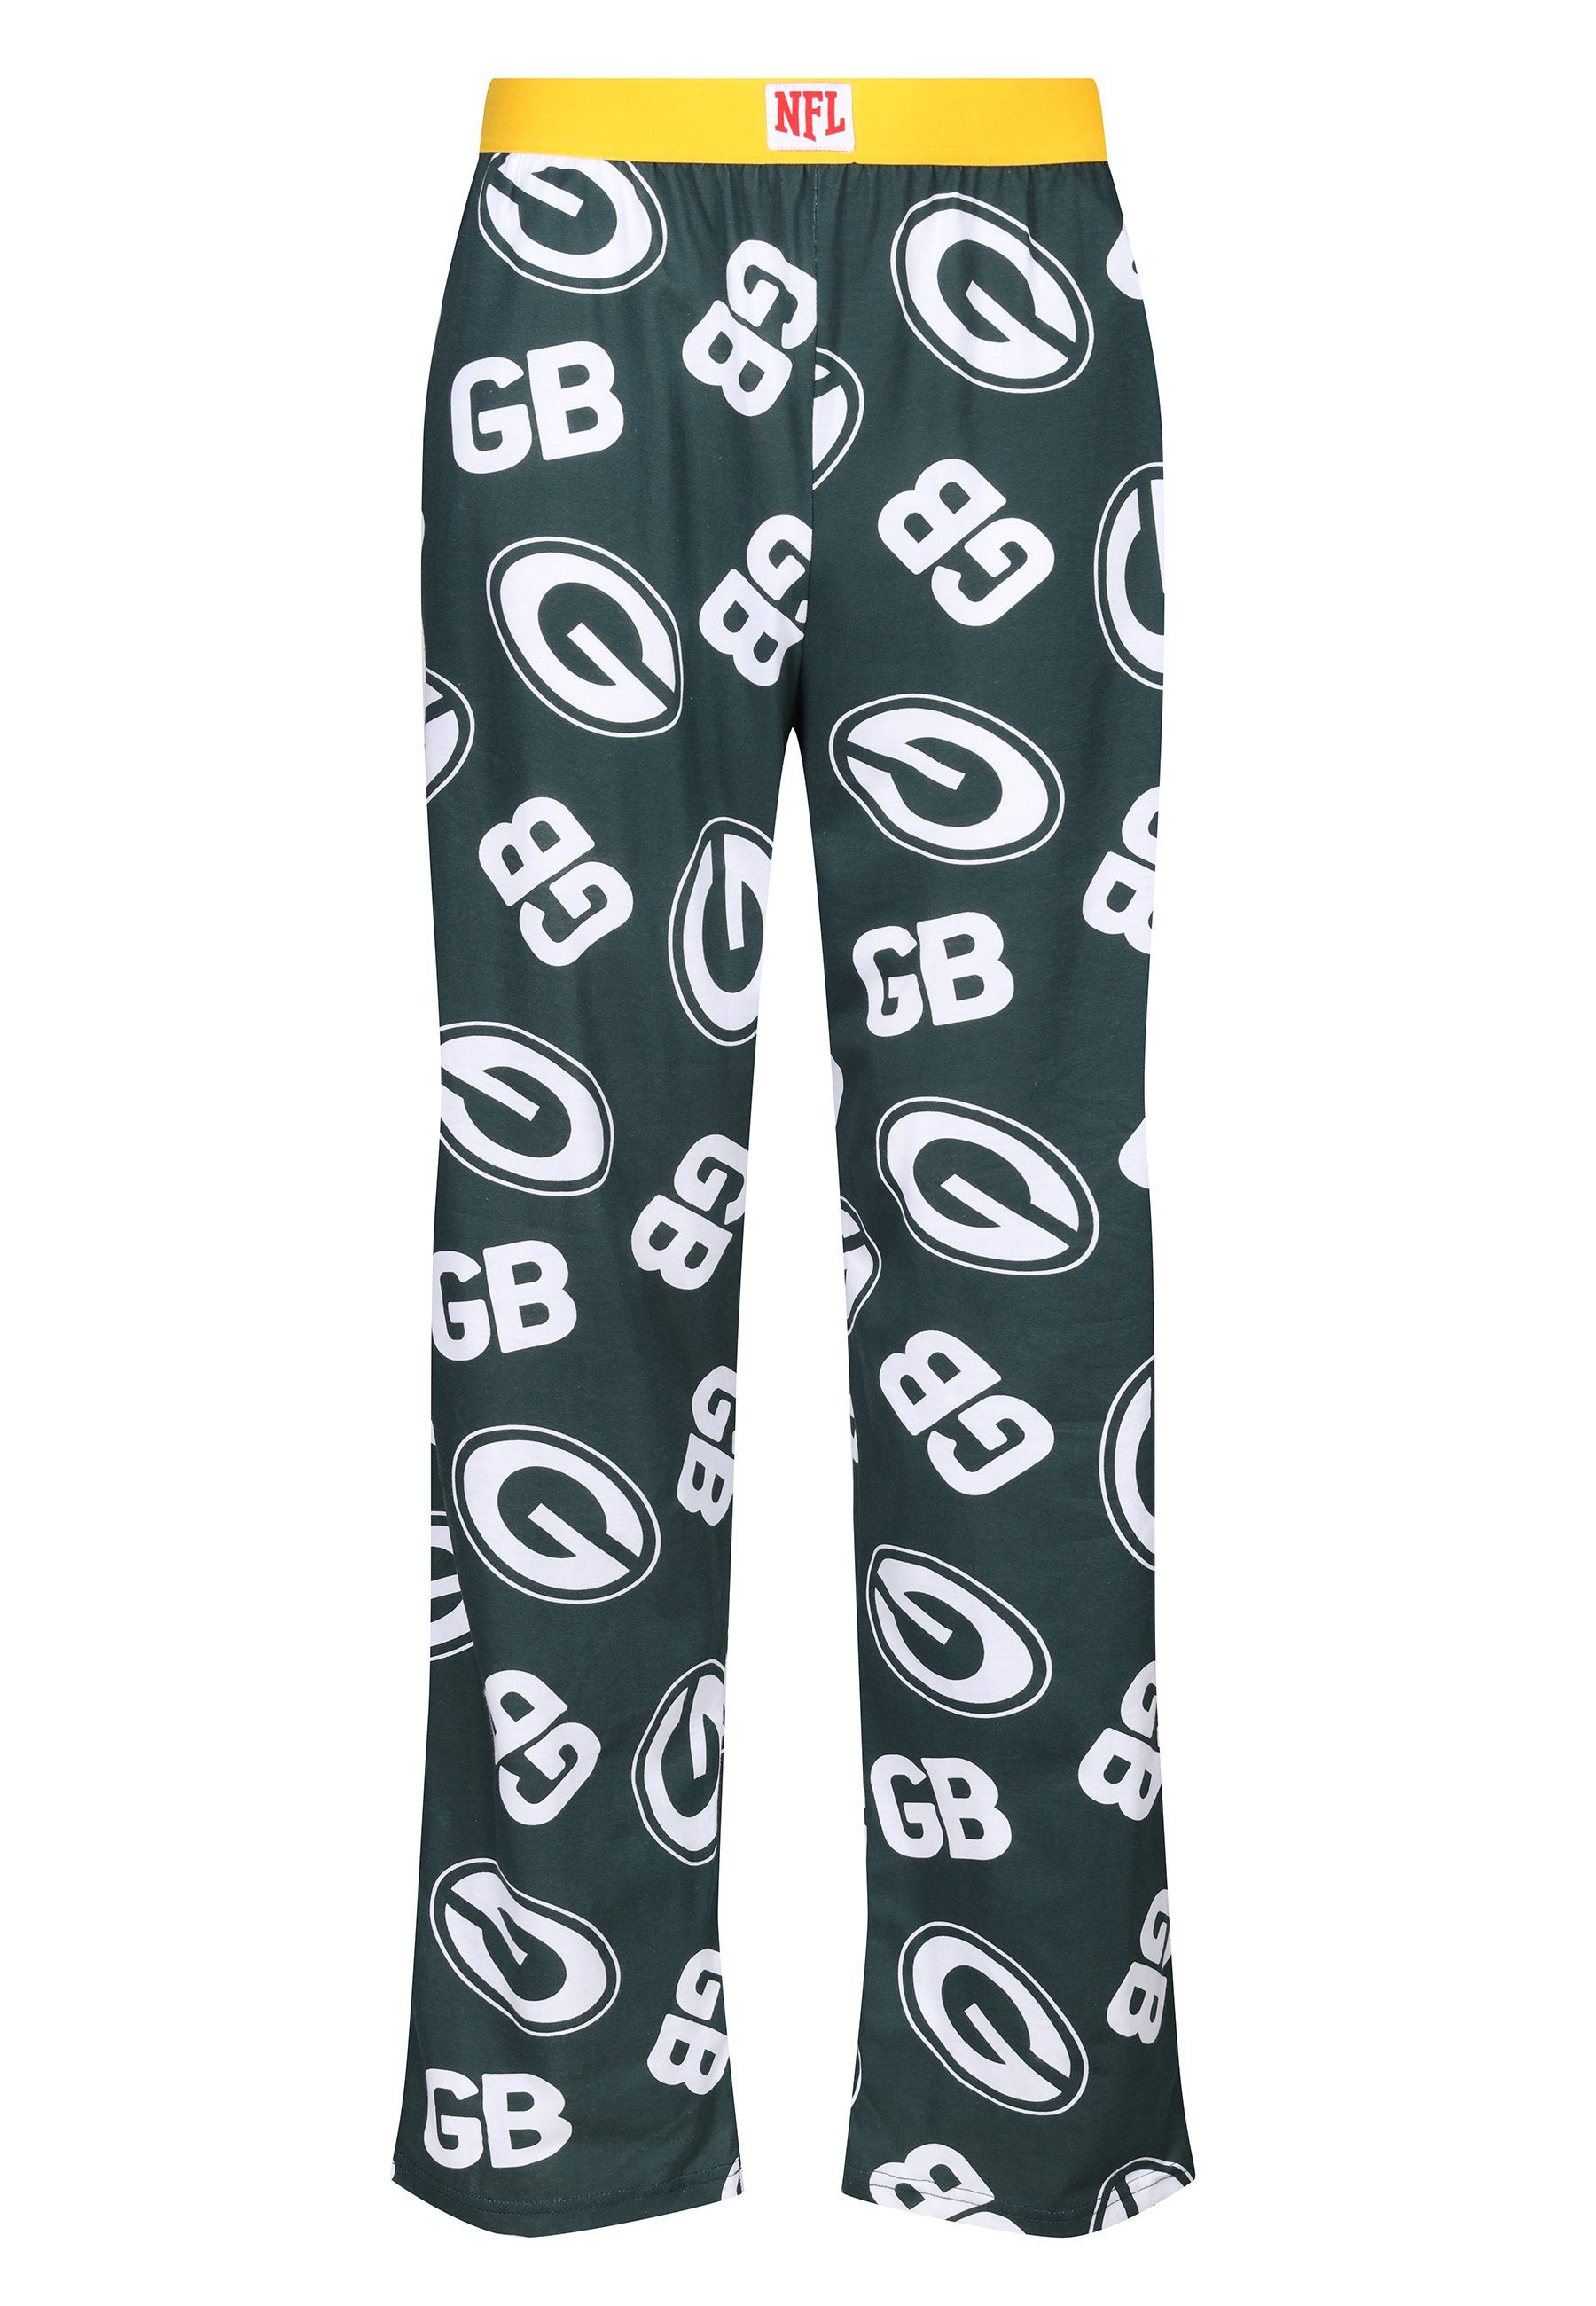 Recovered Loungepants Recovered â€“ Loungepants Green Bay Packers NFL GB Green